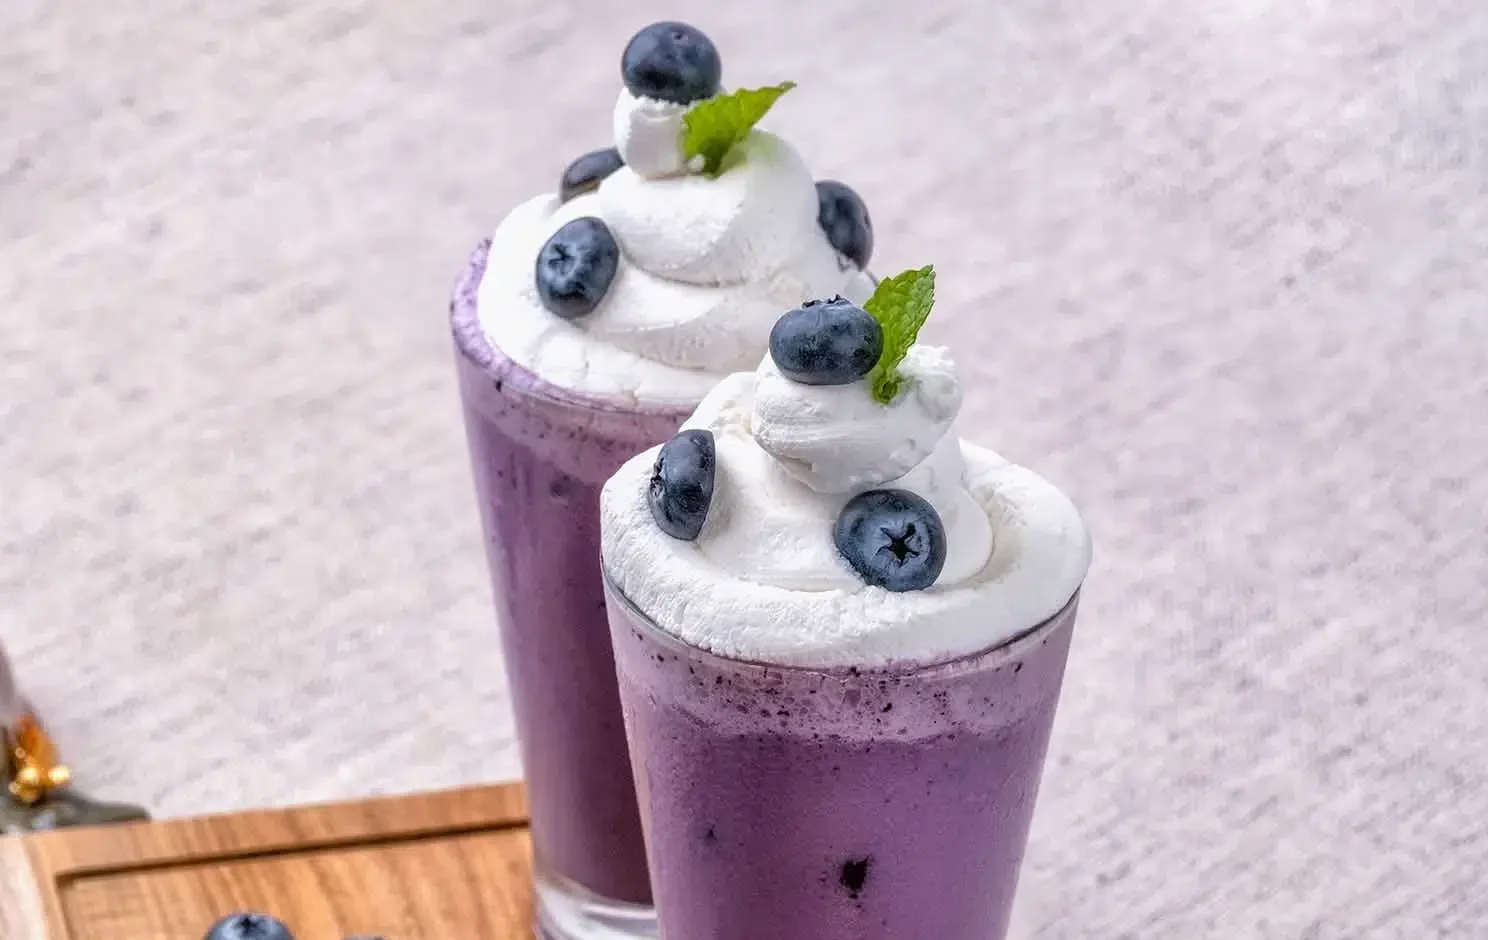 The image features two glasses of Grimace Shake Recipe, each topped with a generous swirl of whipped cream